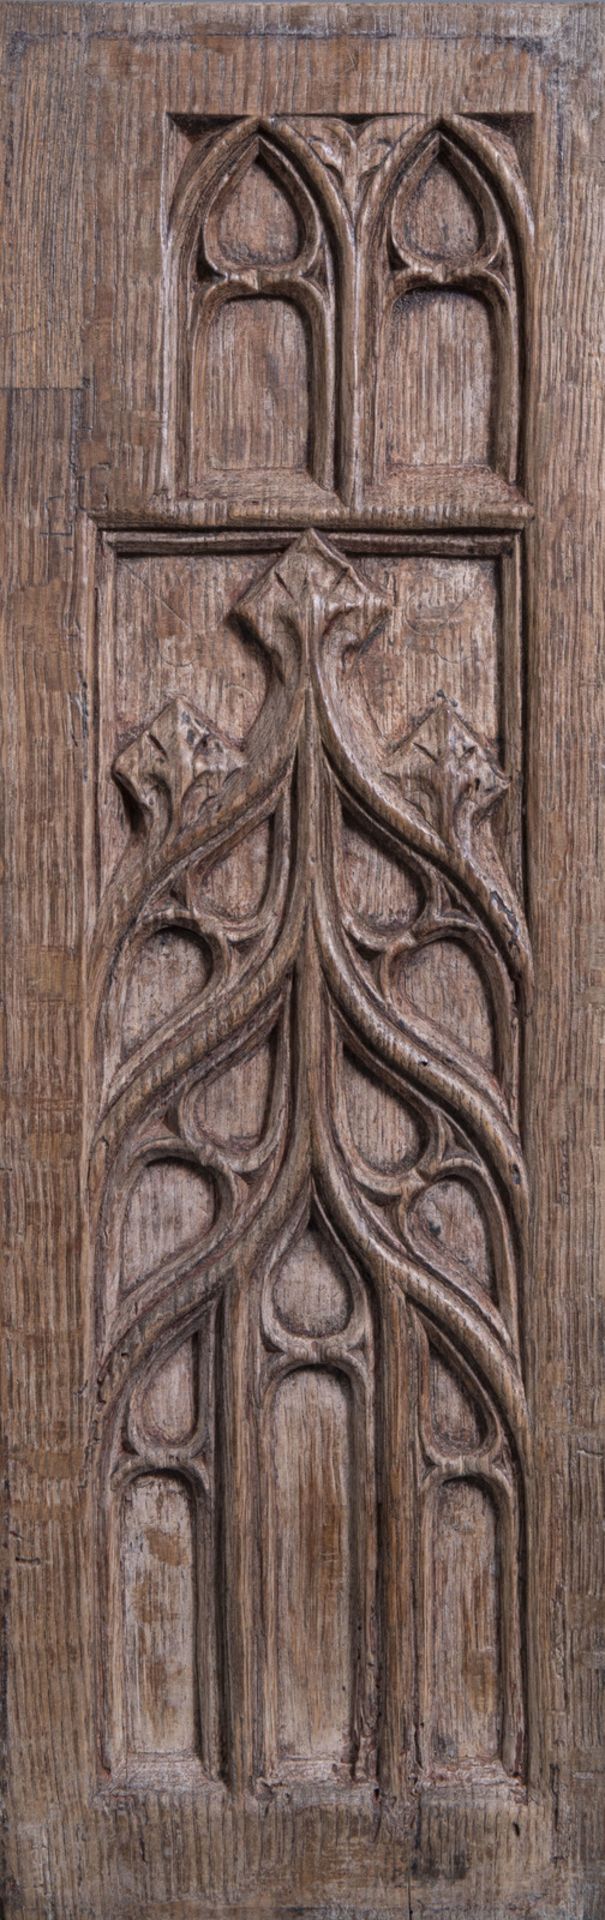 Five Gothic carved wooden panels, France or Flanders, 15th C. and later - Image 7 of 7